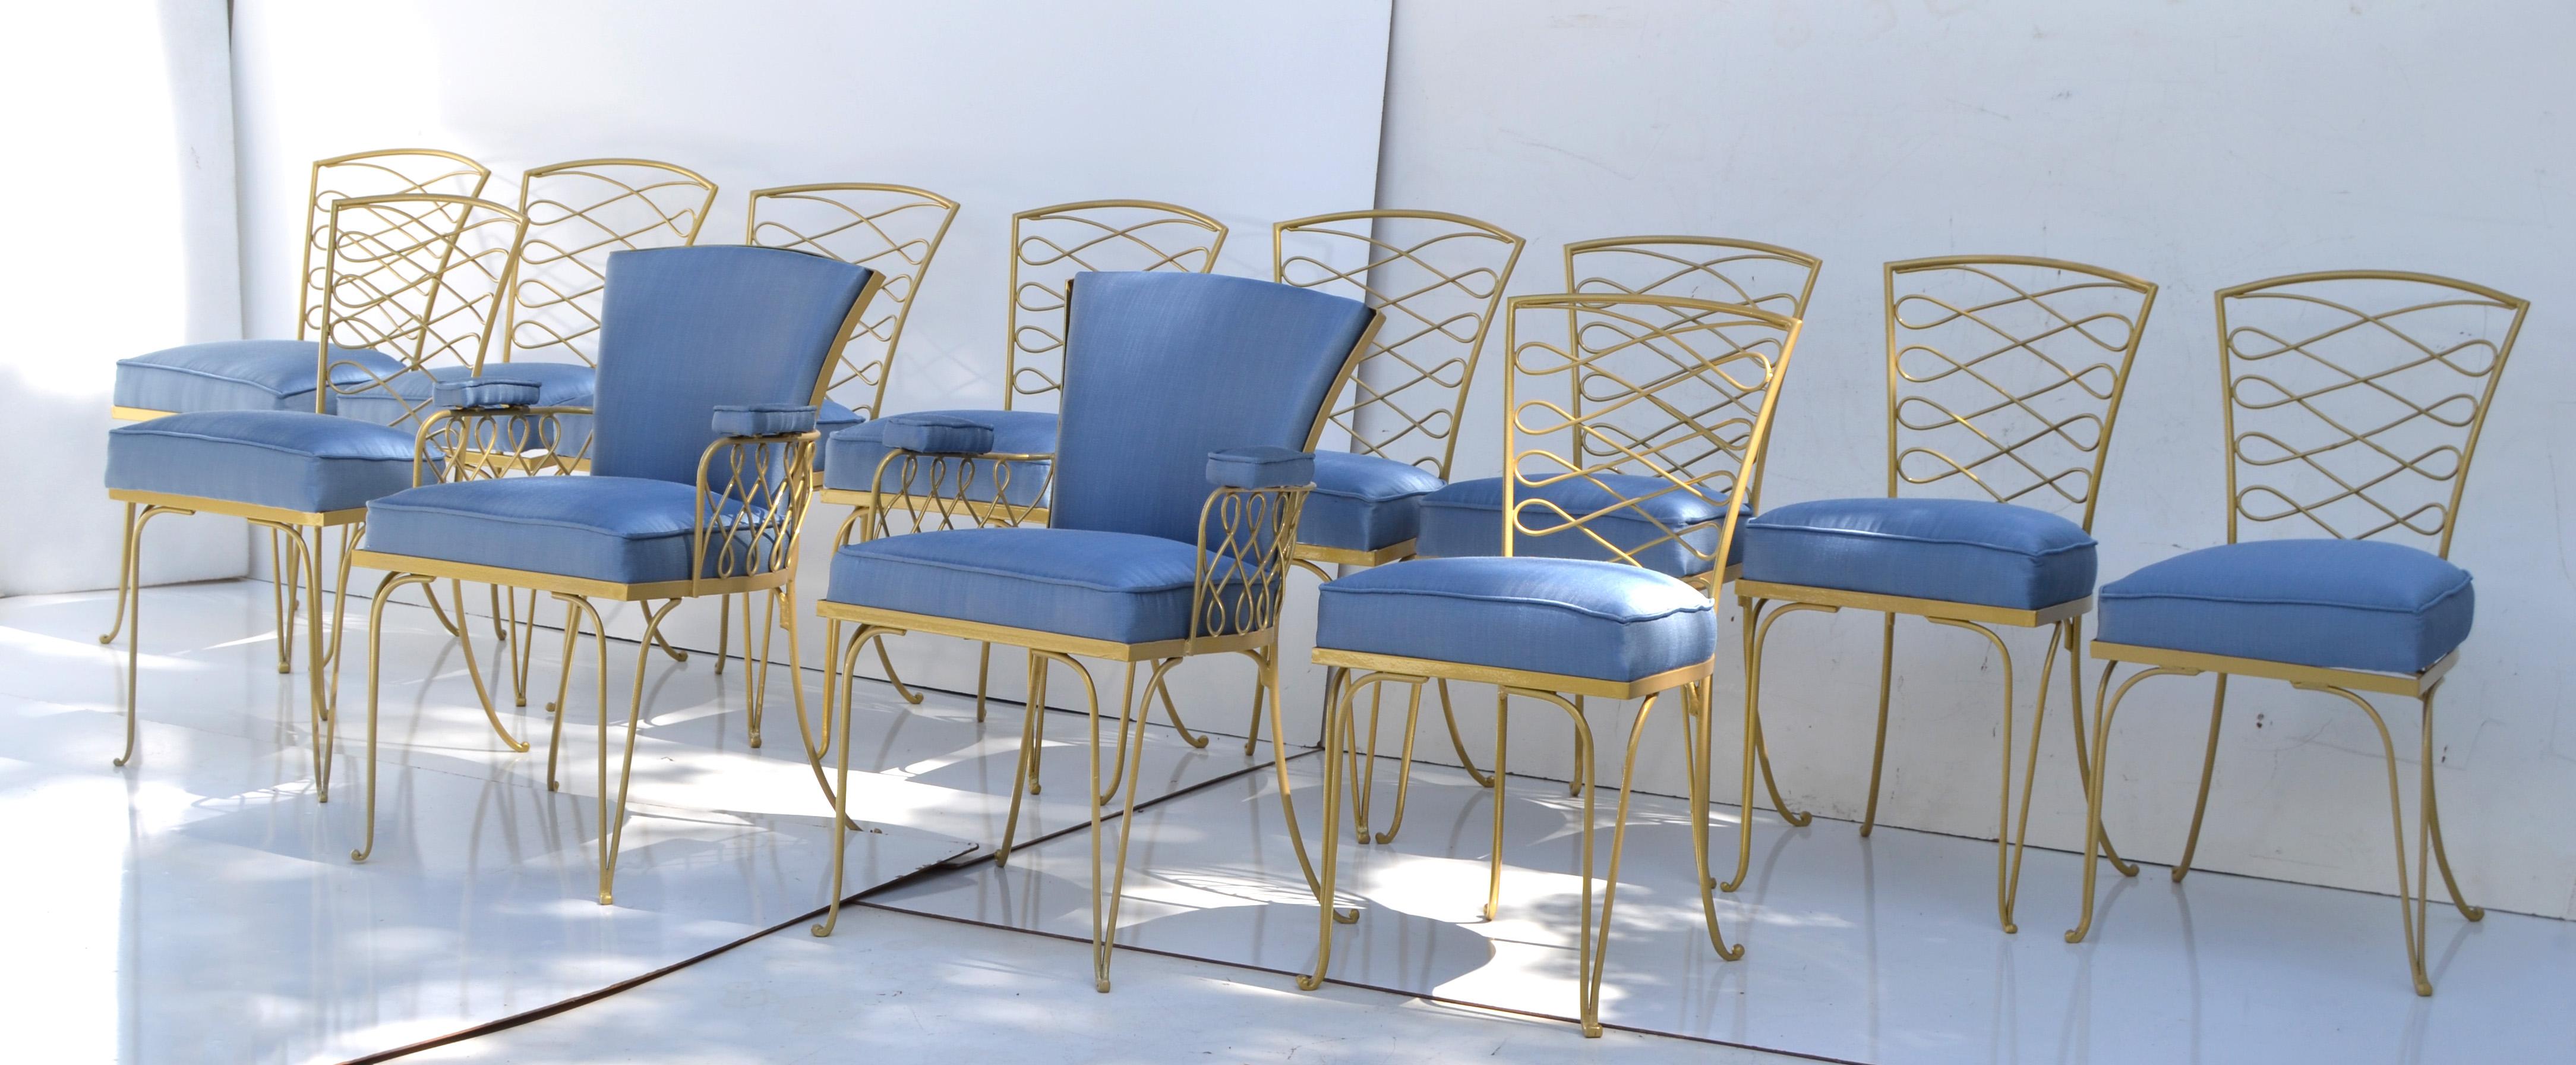 Superb set of Fourteenth Art Deco wrought iron dining chairs by René Prou in the 1940s style.
The set consisting out of 12 side chairs and 2 arm chairs in gold powder-coated wrought iron with a cornflower blue fabric upholstery.
The Set is ready